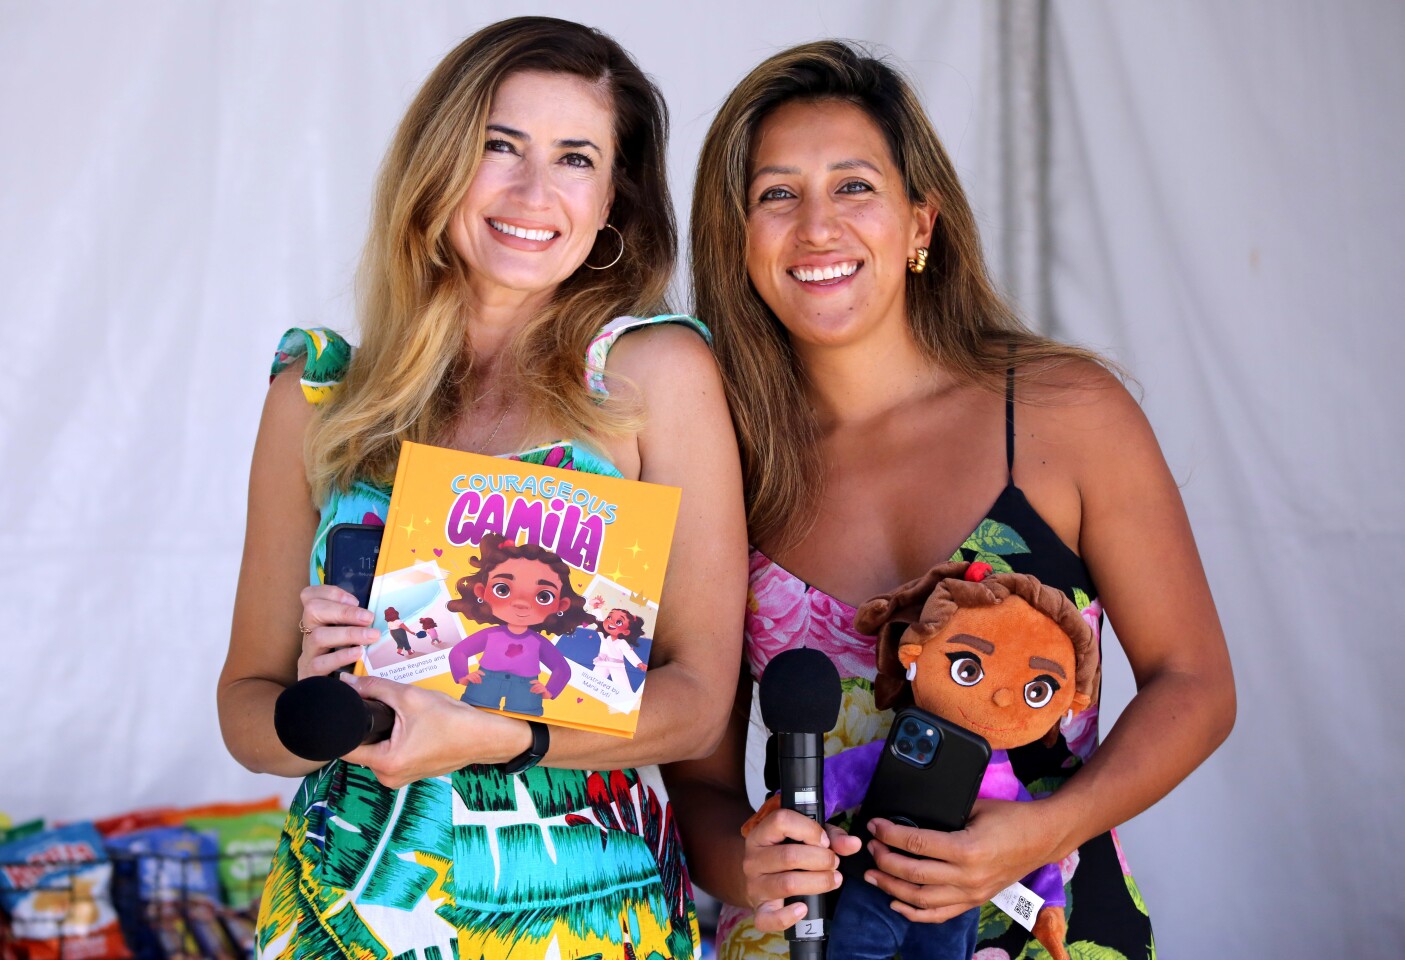 Authors Naibe Reynoso, left, and Giselle Carrillo, right, show their collaborative book called Courageous Camilla at the L.A. Times Festival of Books' Los Angeles Times en Espanol area at the University of Southern California in Los Angeles on Saturday, April 23, 2022.